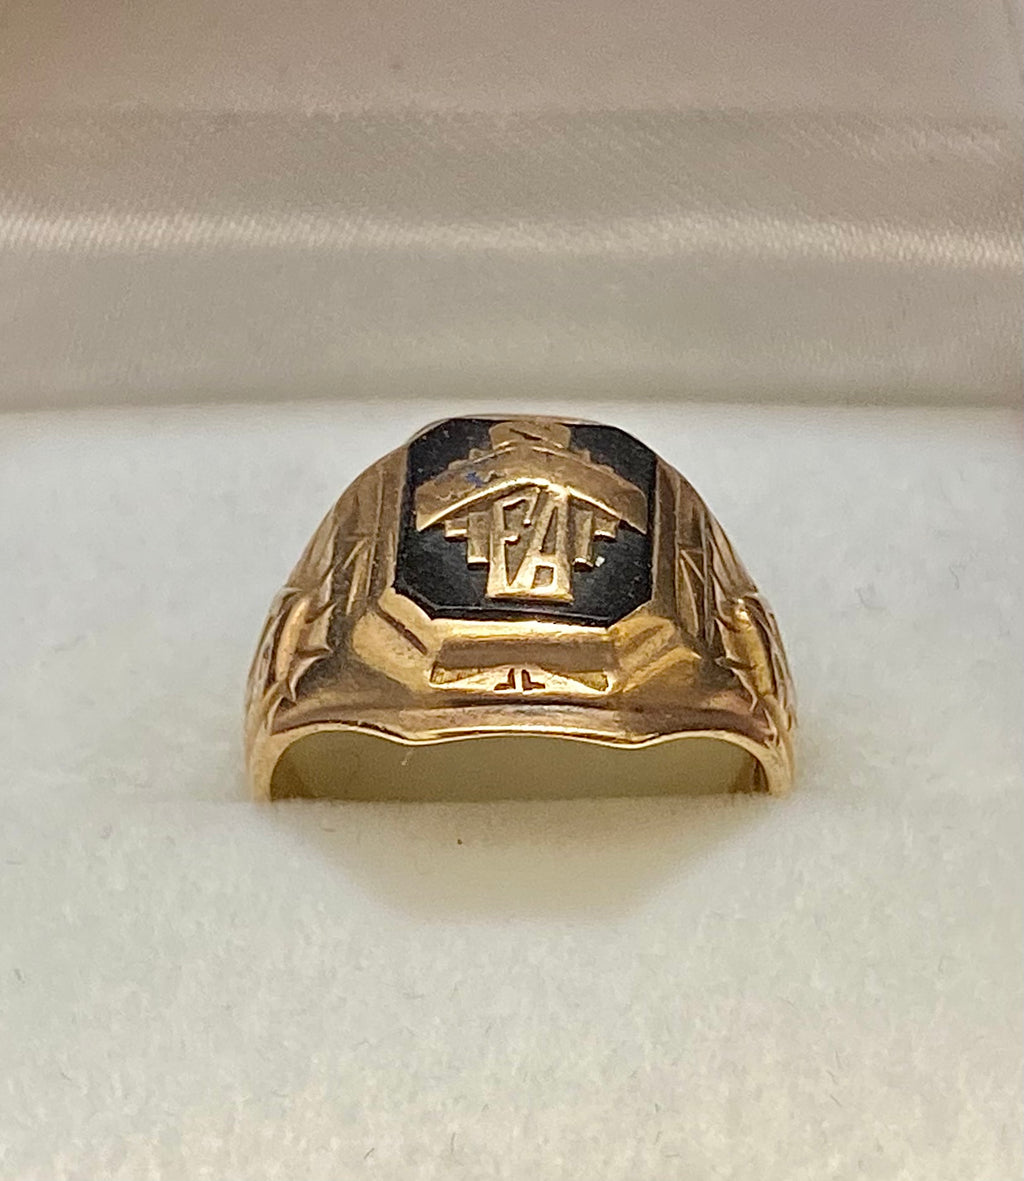 Flyselskaber kor Hælde 1932 Antique Fort Ann High School Class Ring in Solid Yellow Gold - $6